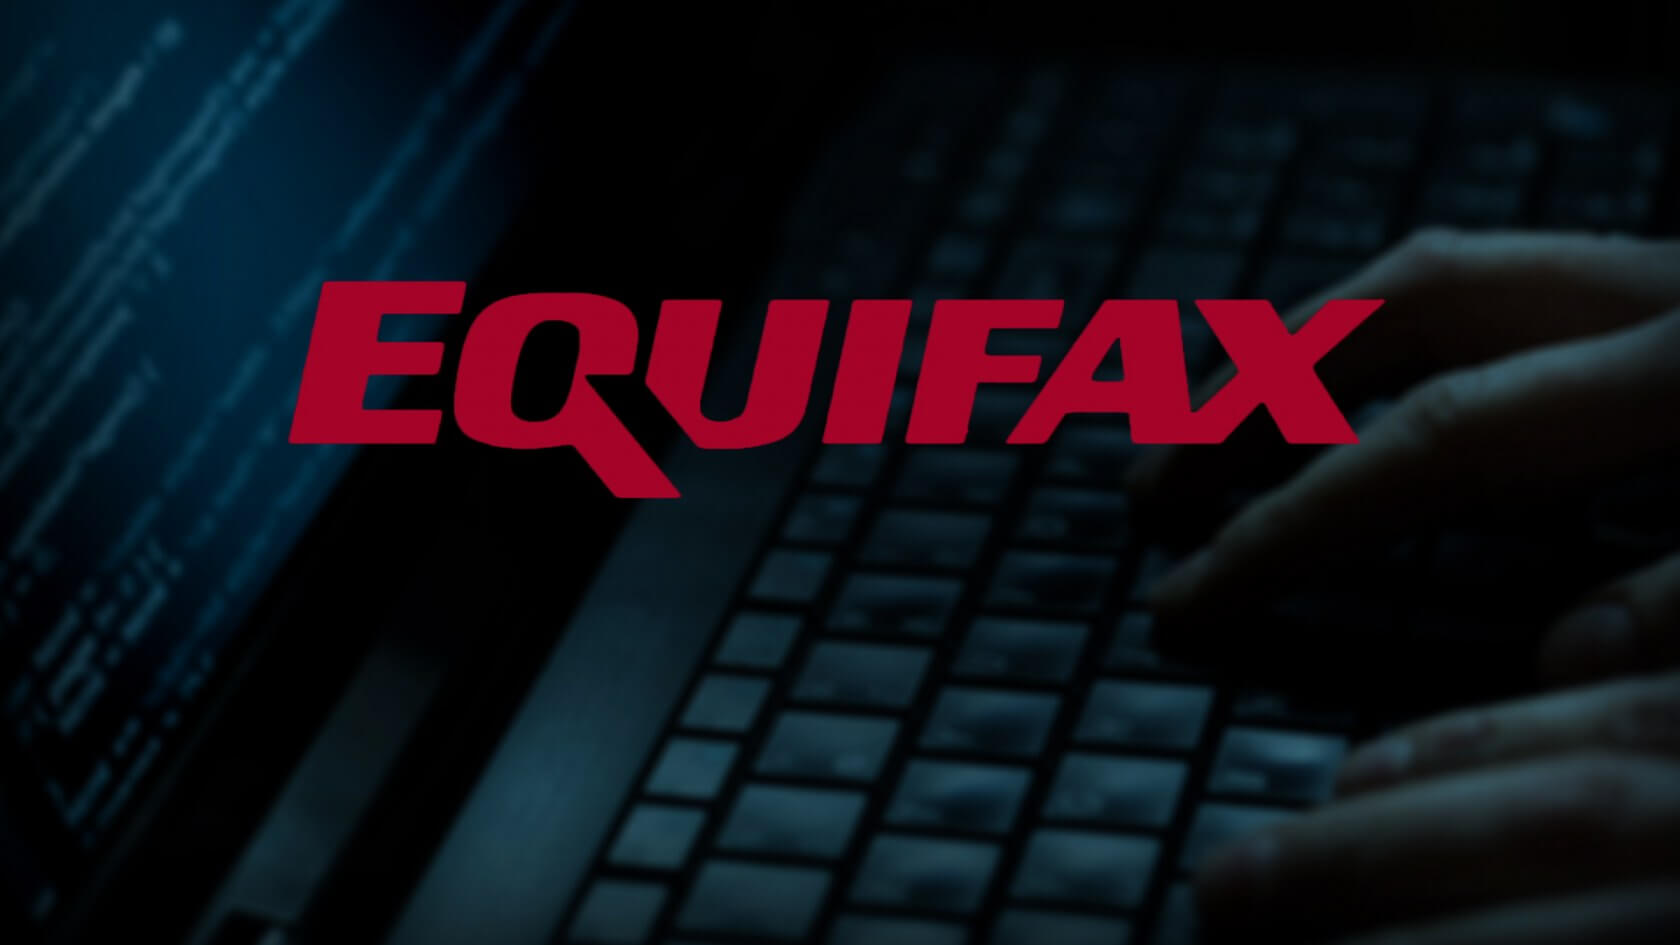 Former Equifax director jailed for insider trading